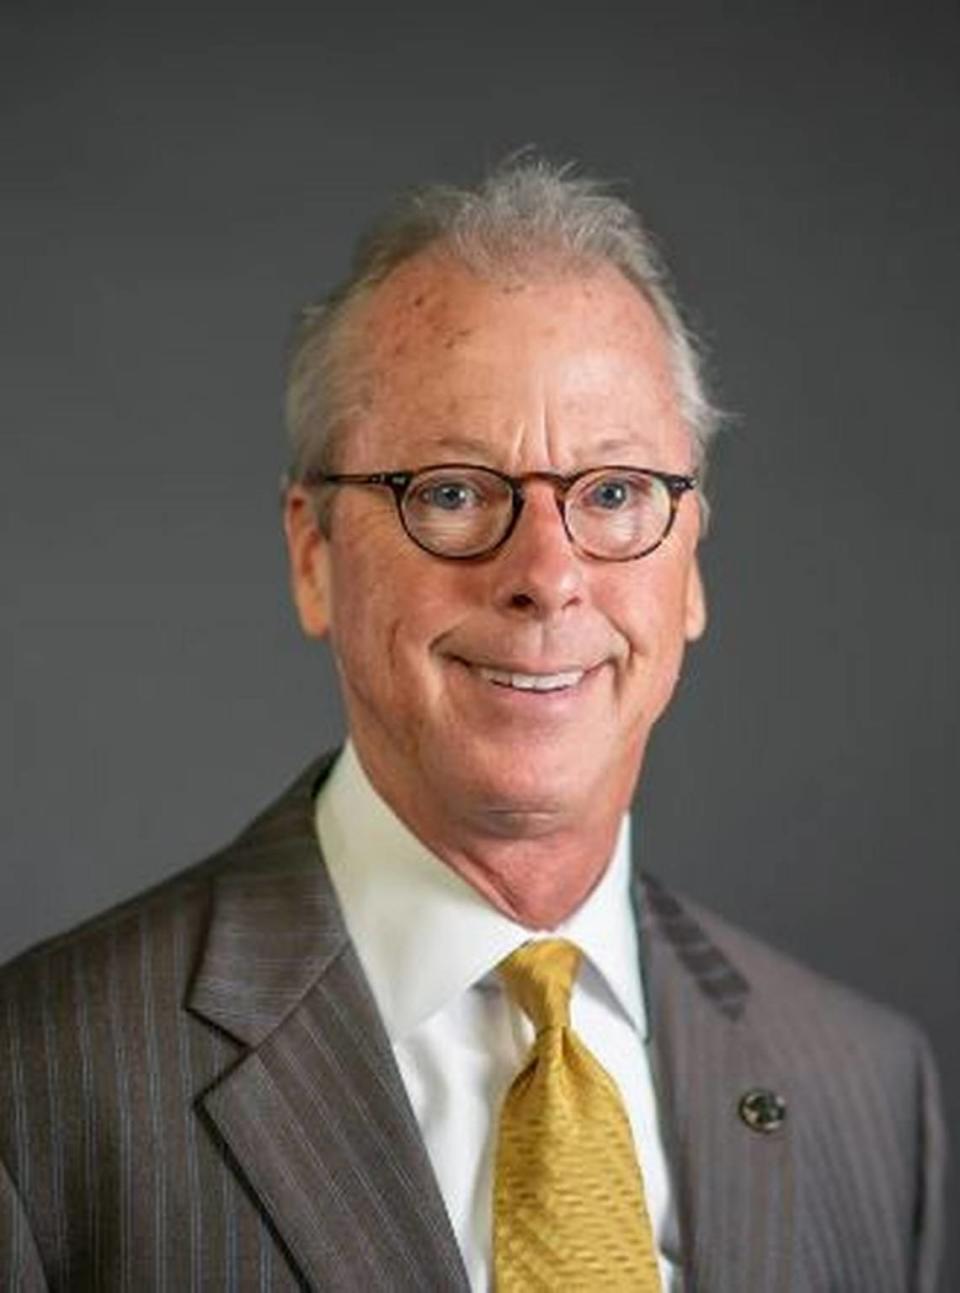 Emporia State University President Ken Hush has issued an “open letter” explaining why he thinks the loss of 13% of his student body in one year is no big deal. Emporia State image